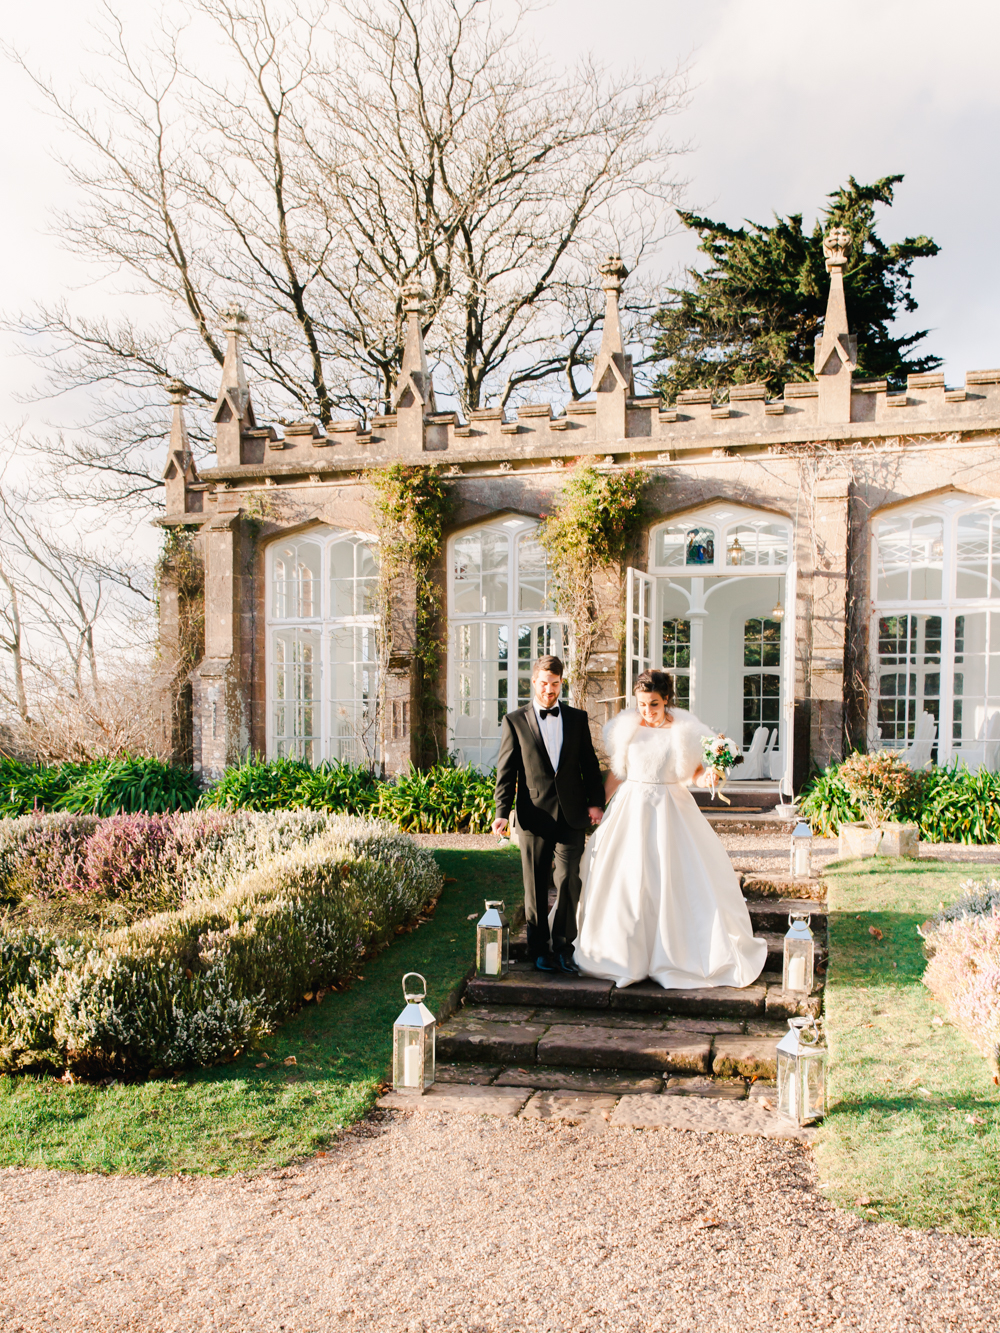 Bride and Groom hold hands in the garden of the country house estate